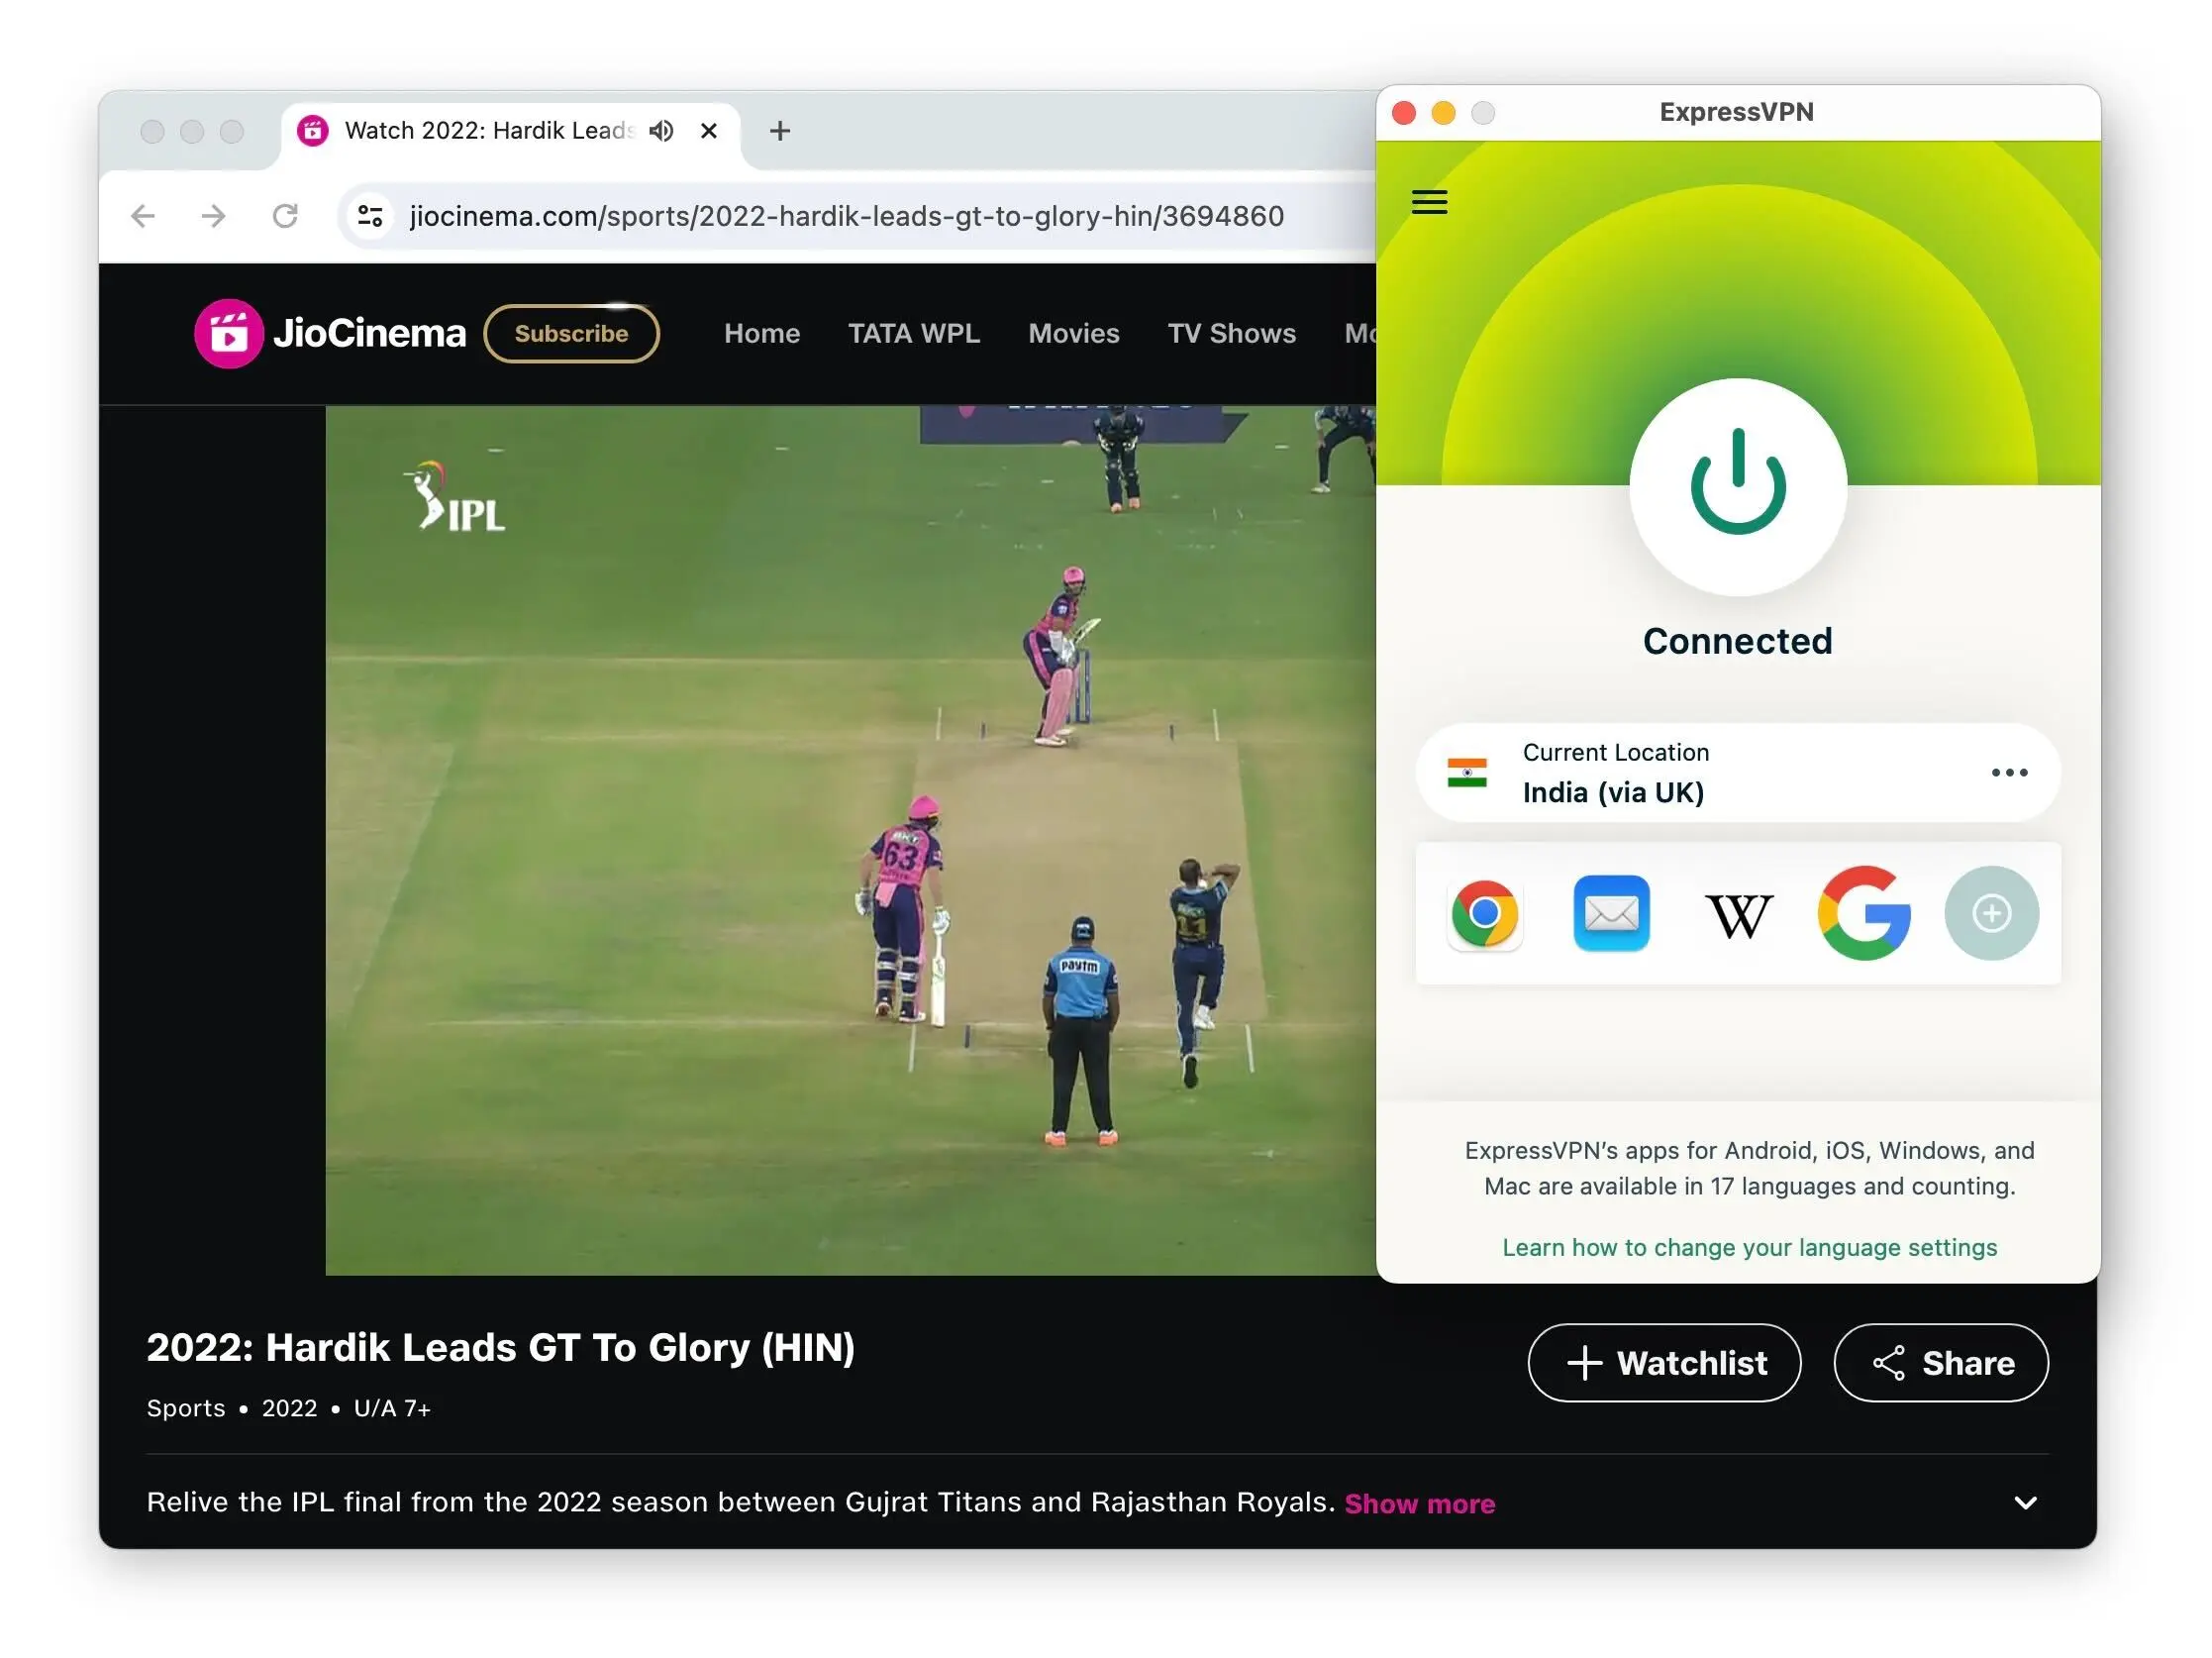 Using ExpressVPN with with JioCinema to watch the IPL